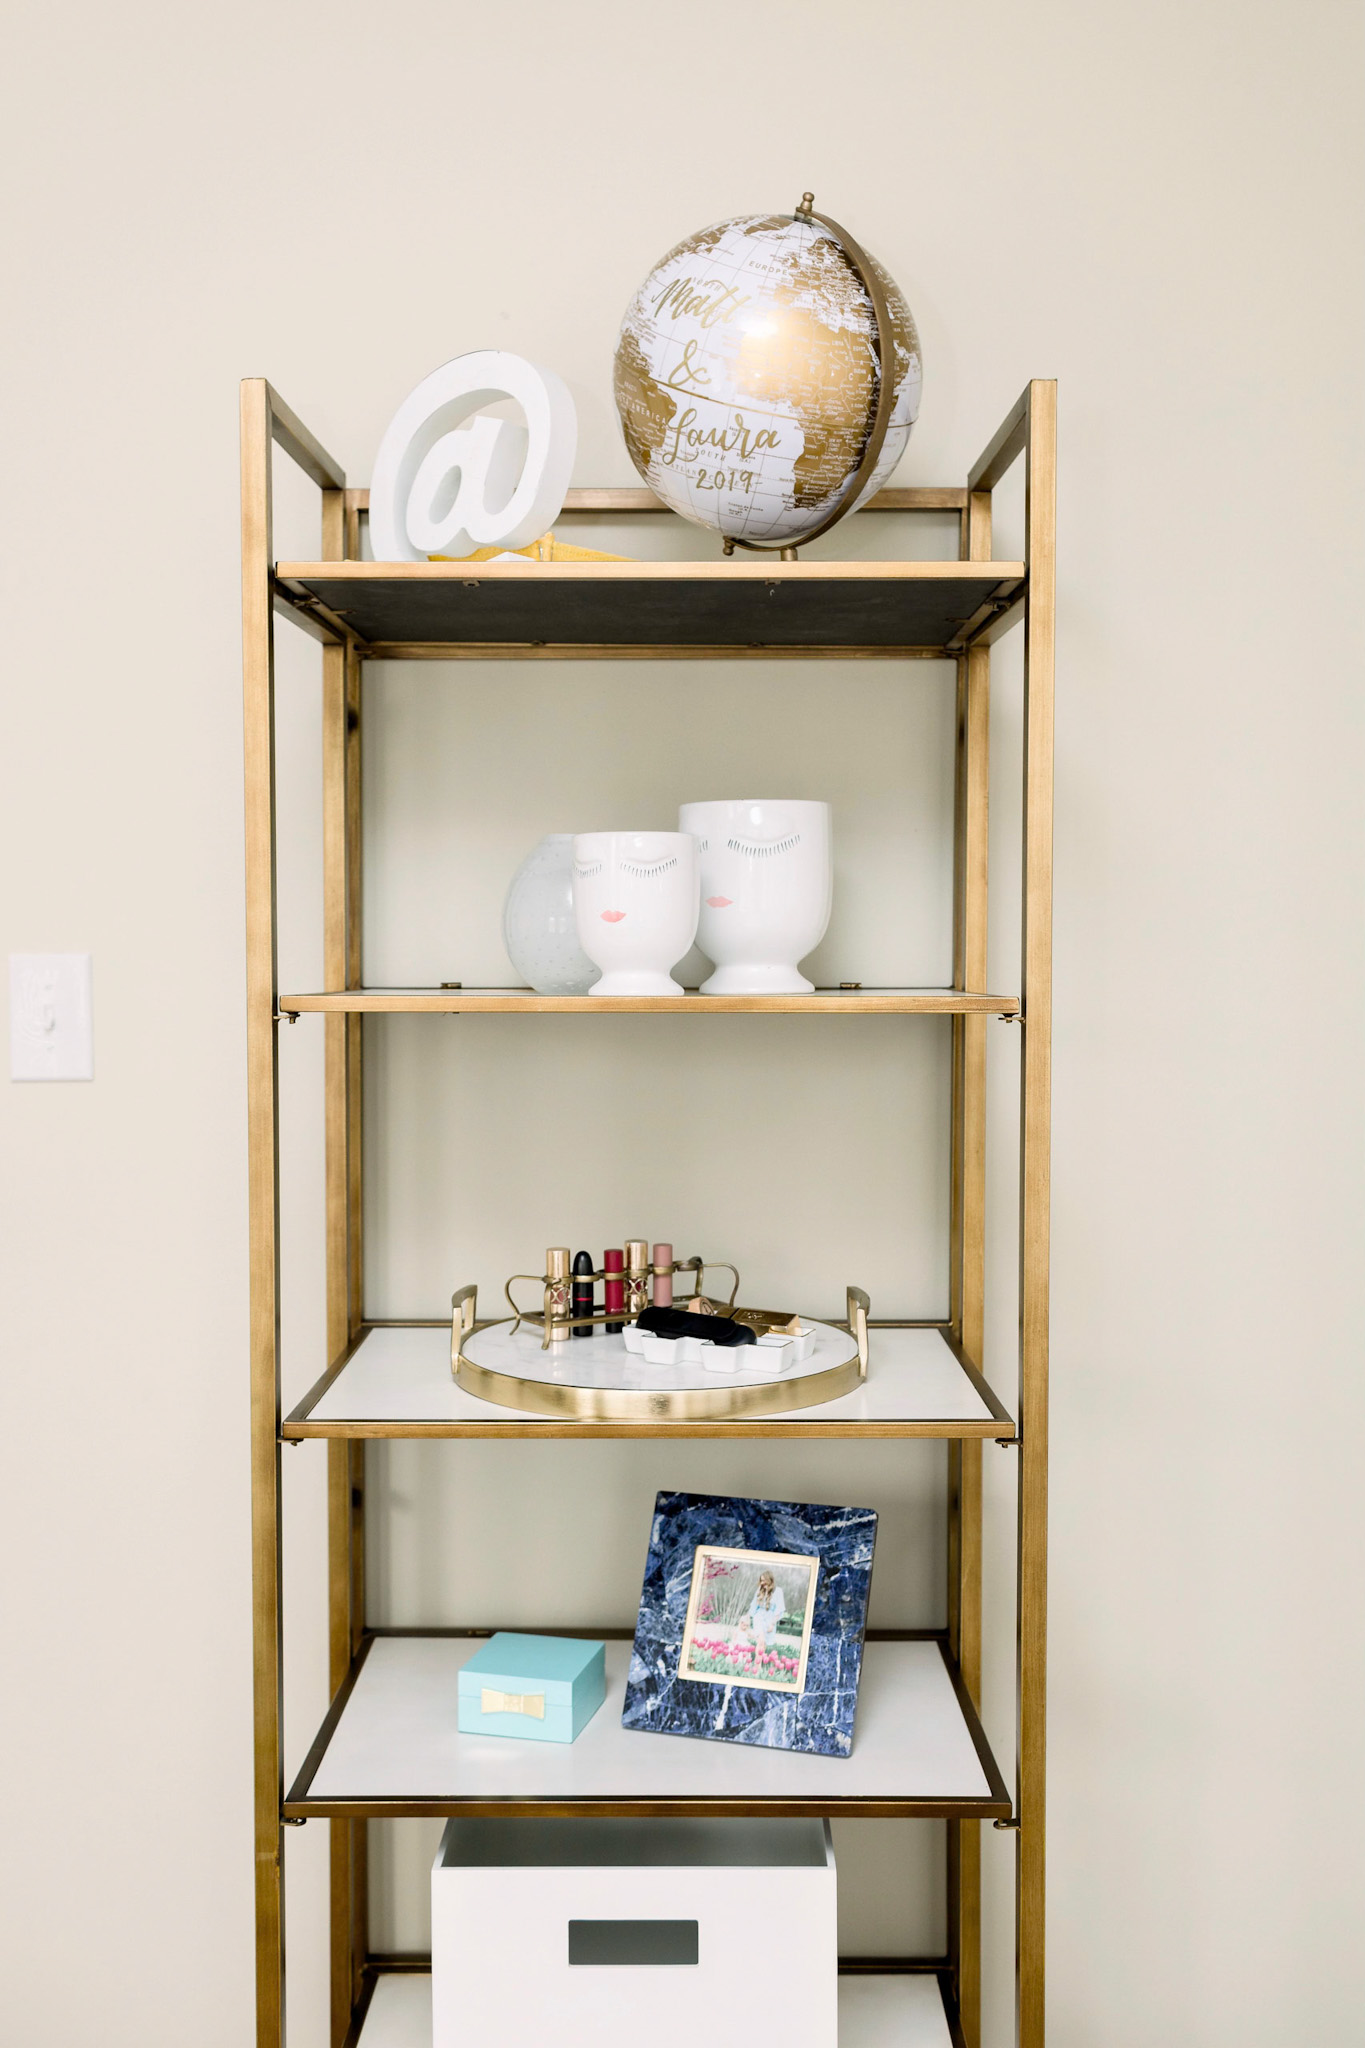 How to Organize your Office with Wayfair office furniture, tips featured by top Memphis life and style blog, Walking in Memphis in High Heels.